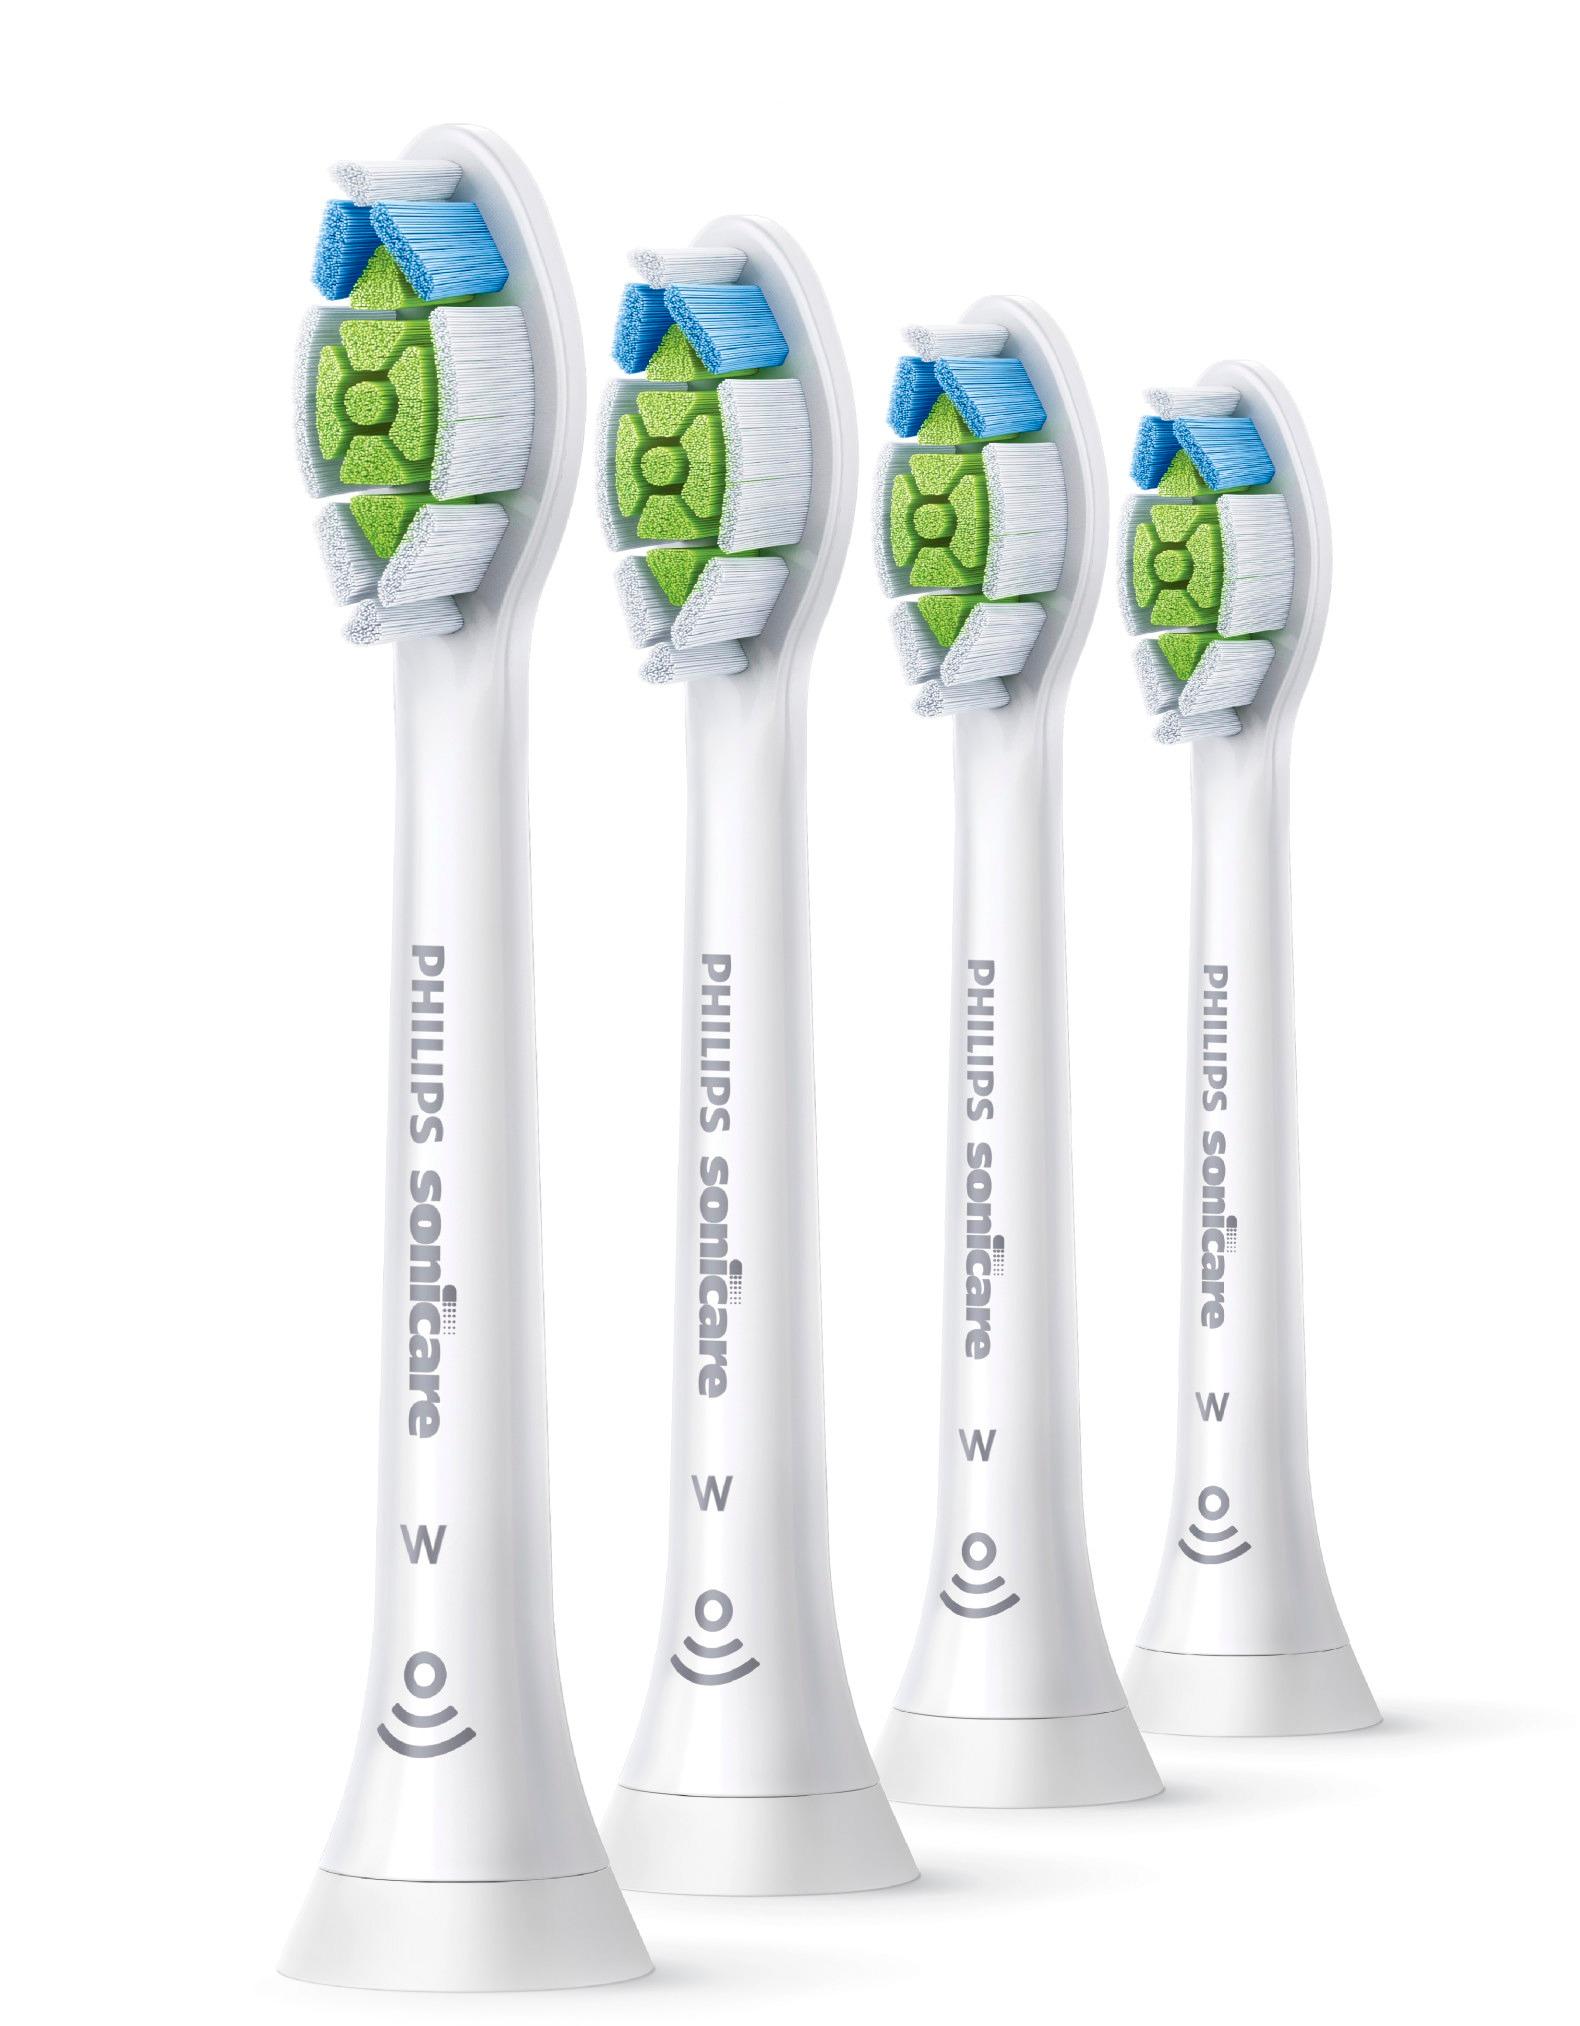 Philips Sonicare DiamondClean Replacement Toothbrush Heads (4-pack) White  HX6064/65 - Best Buy